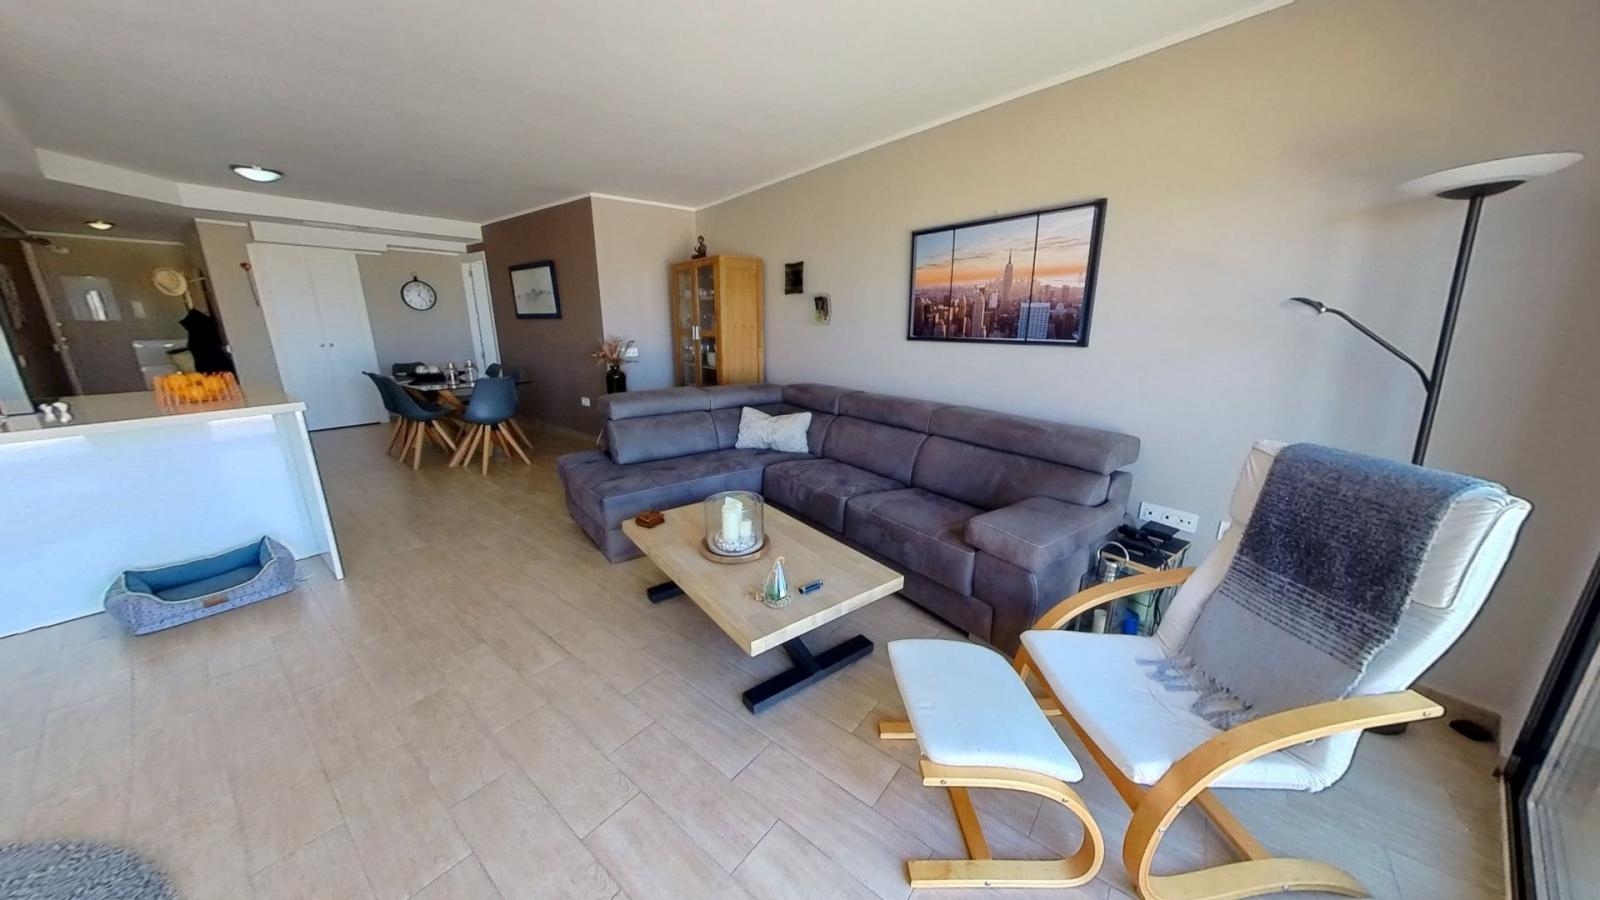 MAGNIFICENT LOWER APARTMENT WITH LARGE TERRACE OVERLOOKING THE SEA IN GRAN ALACANT